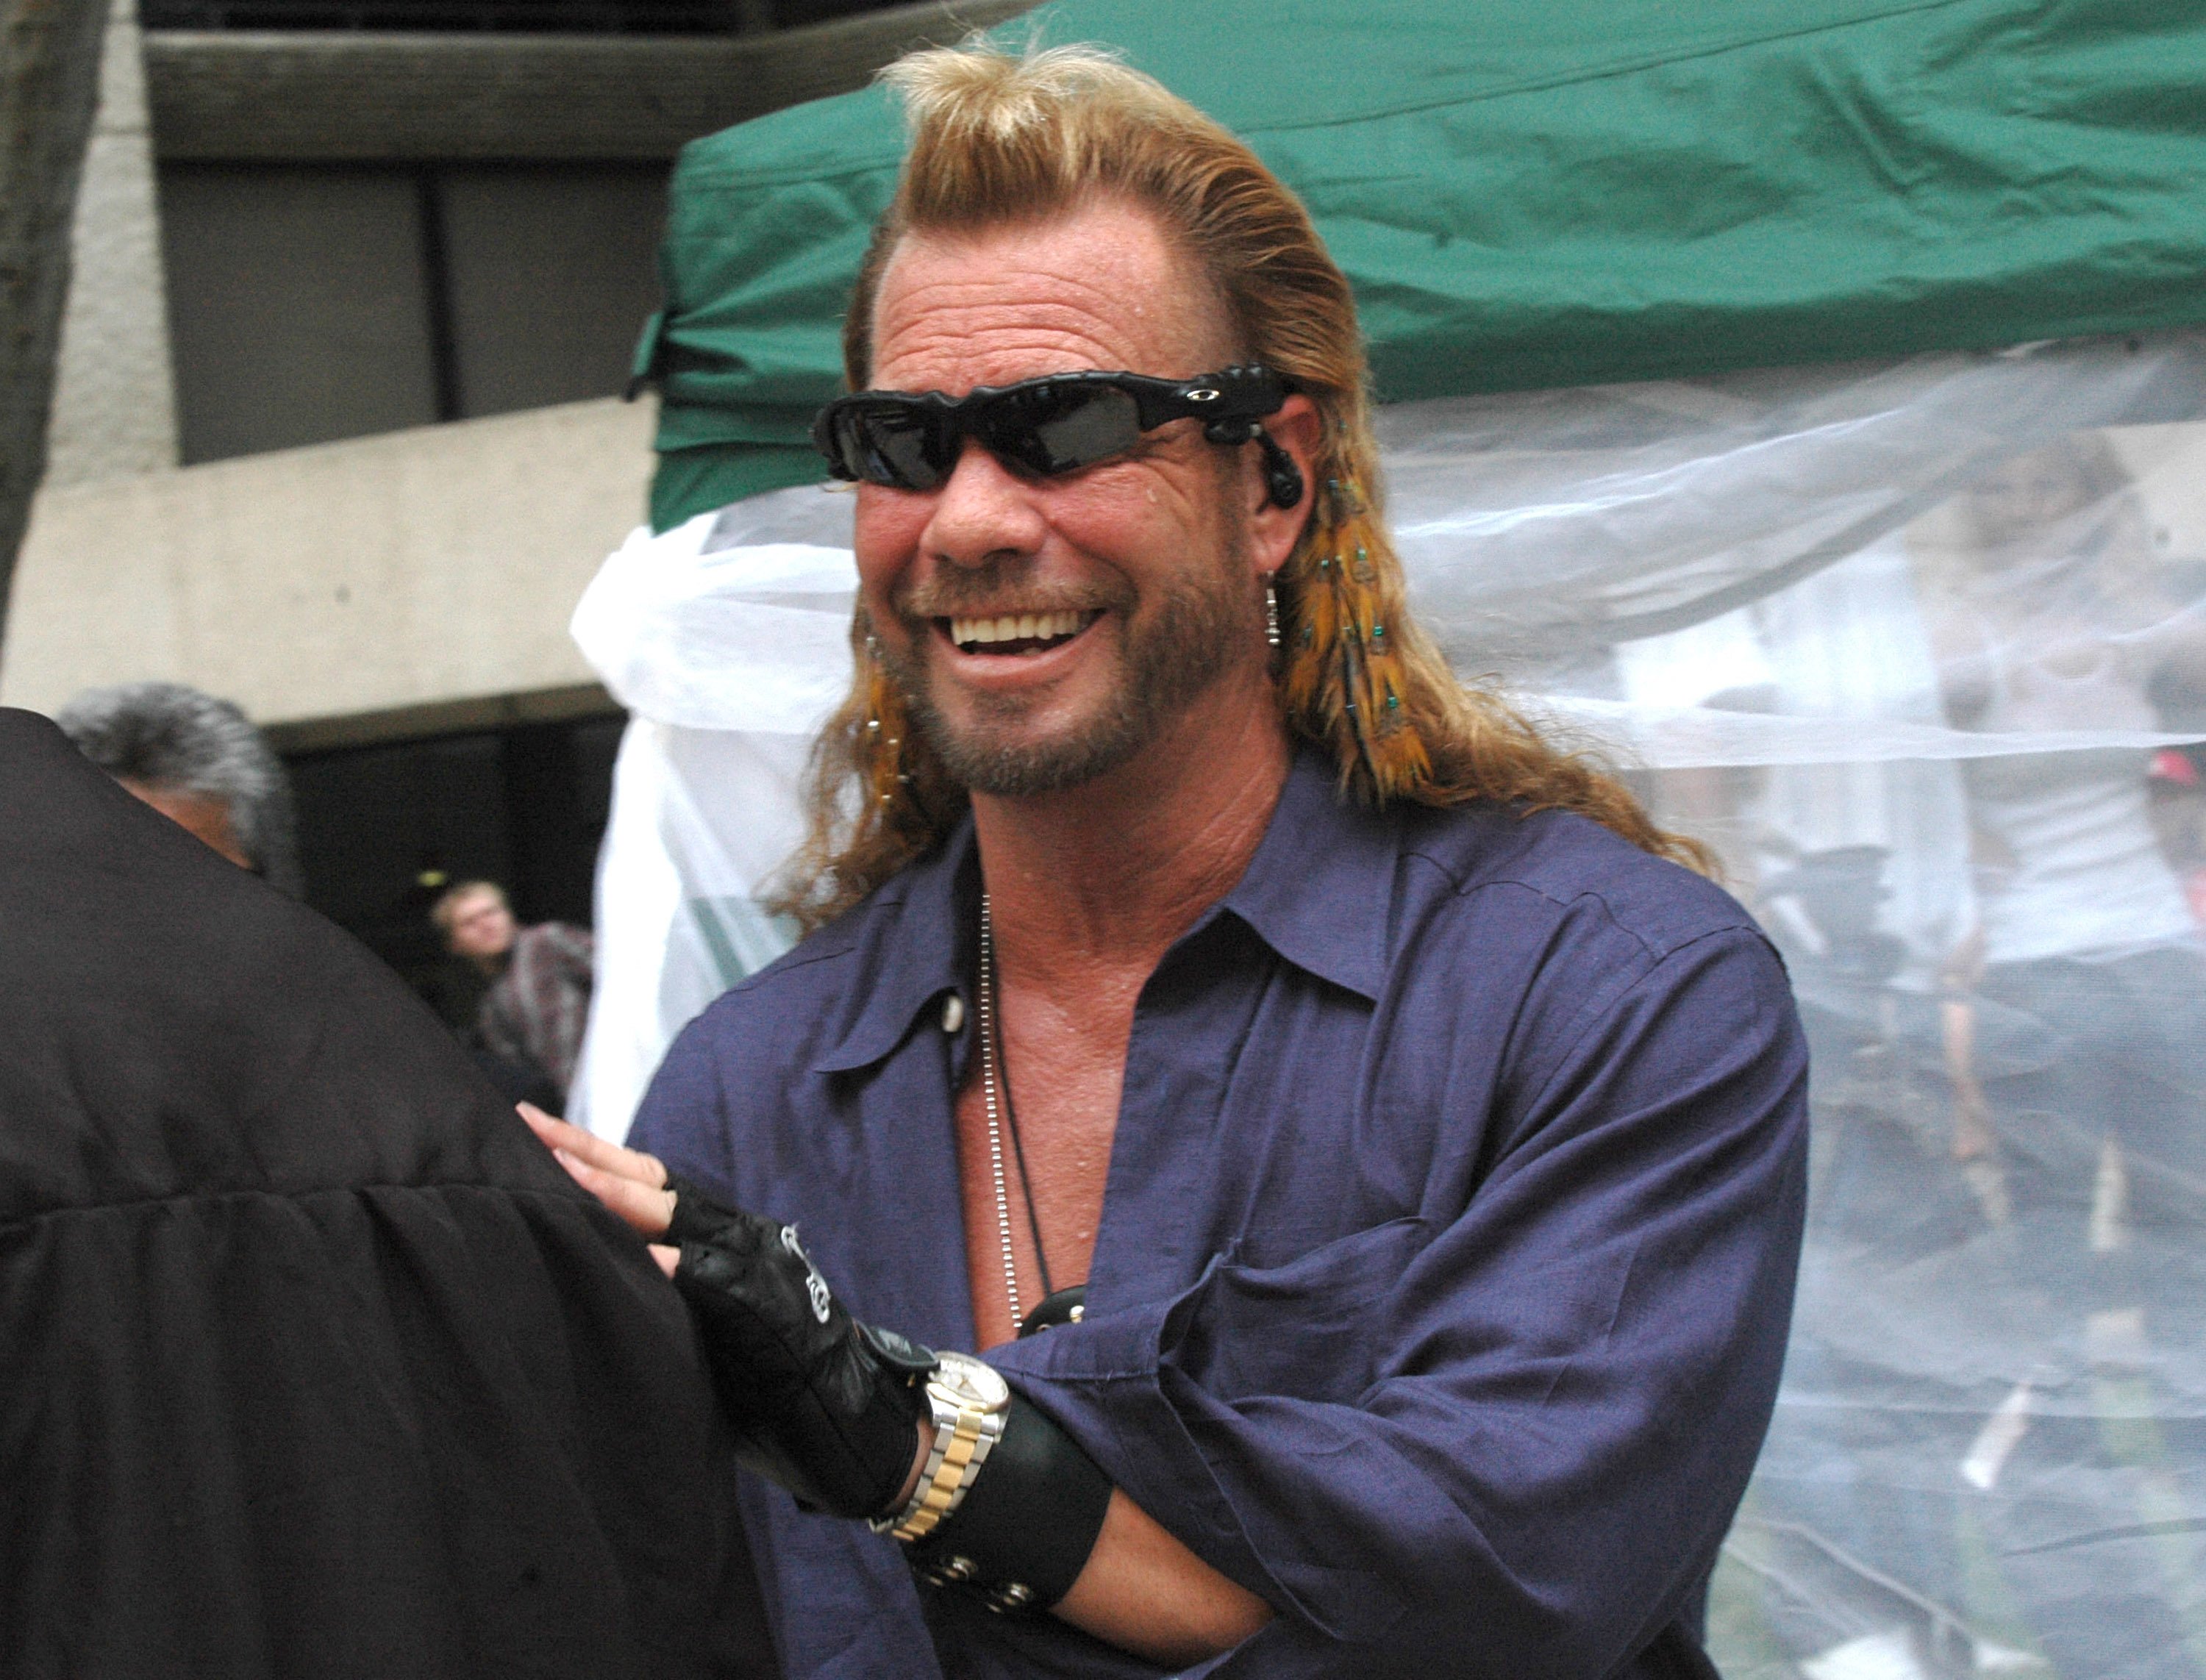 Duane Chapman aka Dog the Bounty Hunter at March of Dimes event in Honolulu in 2006